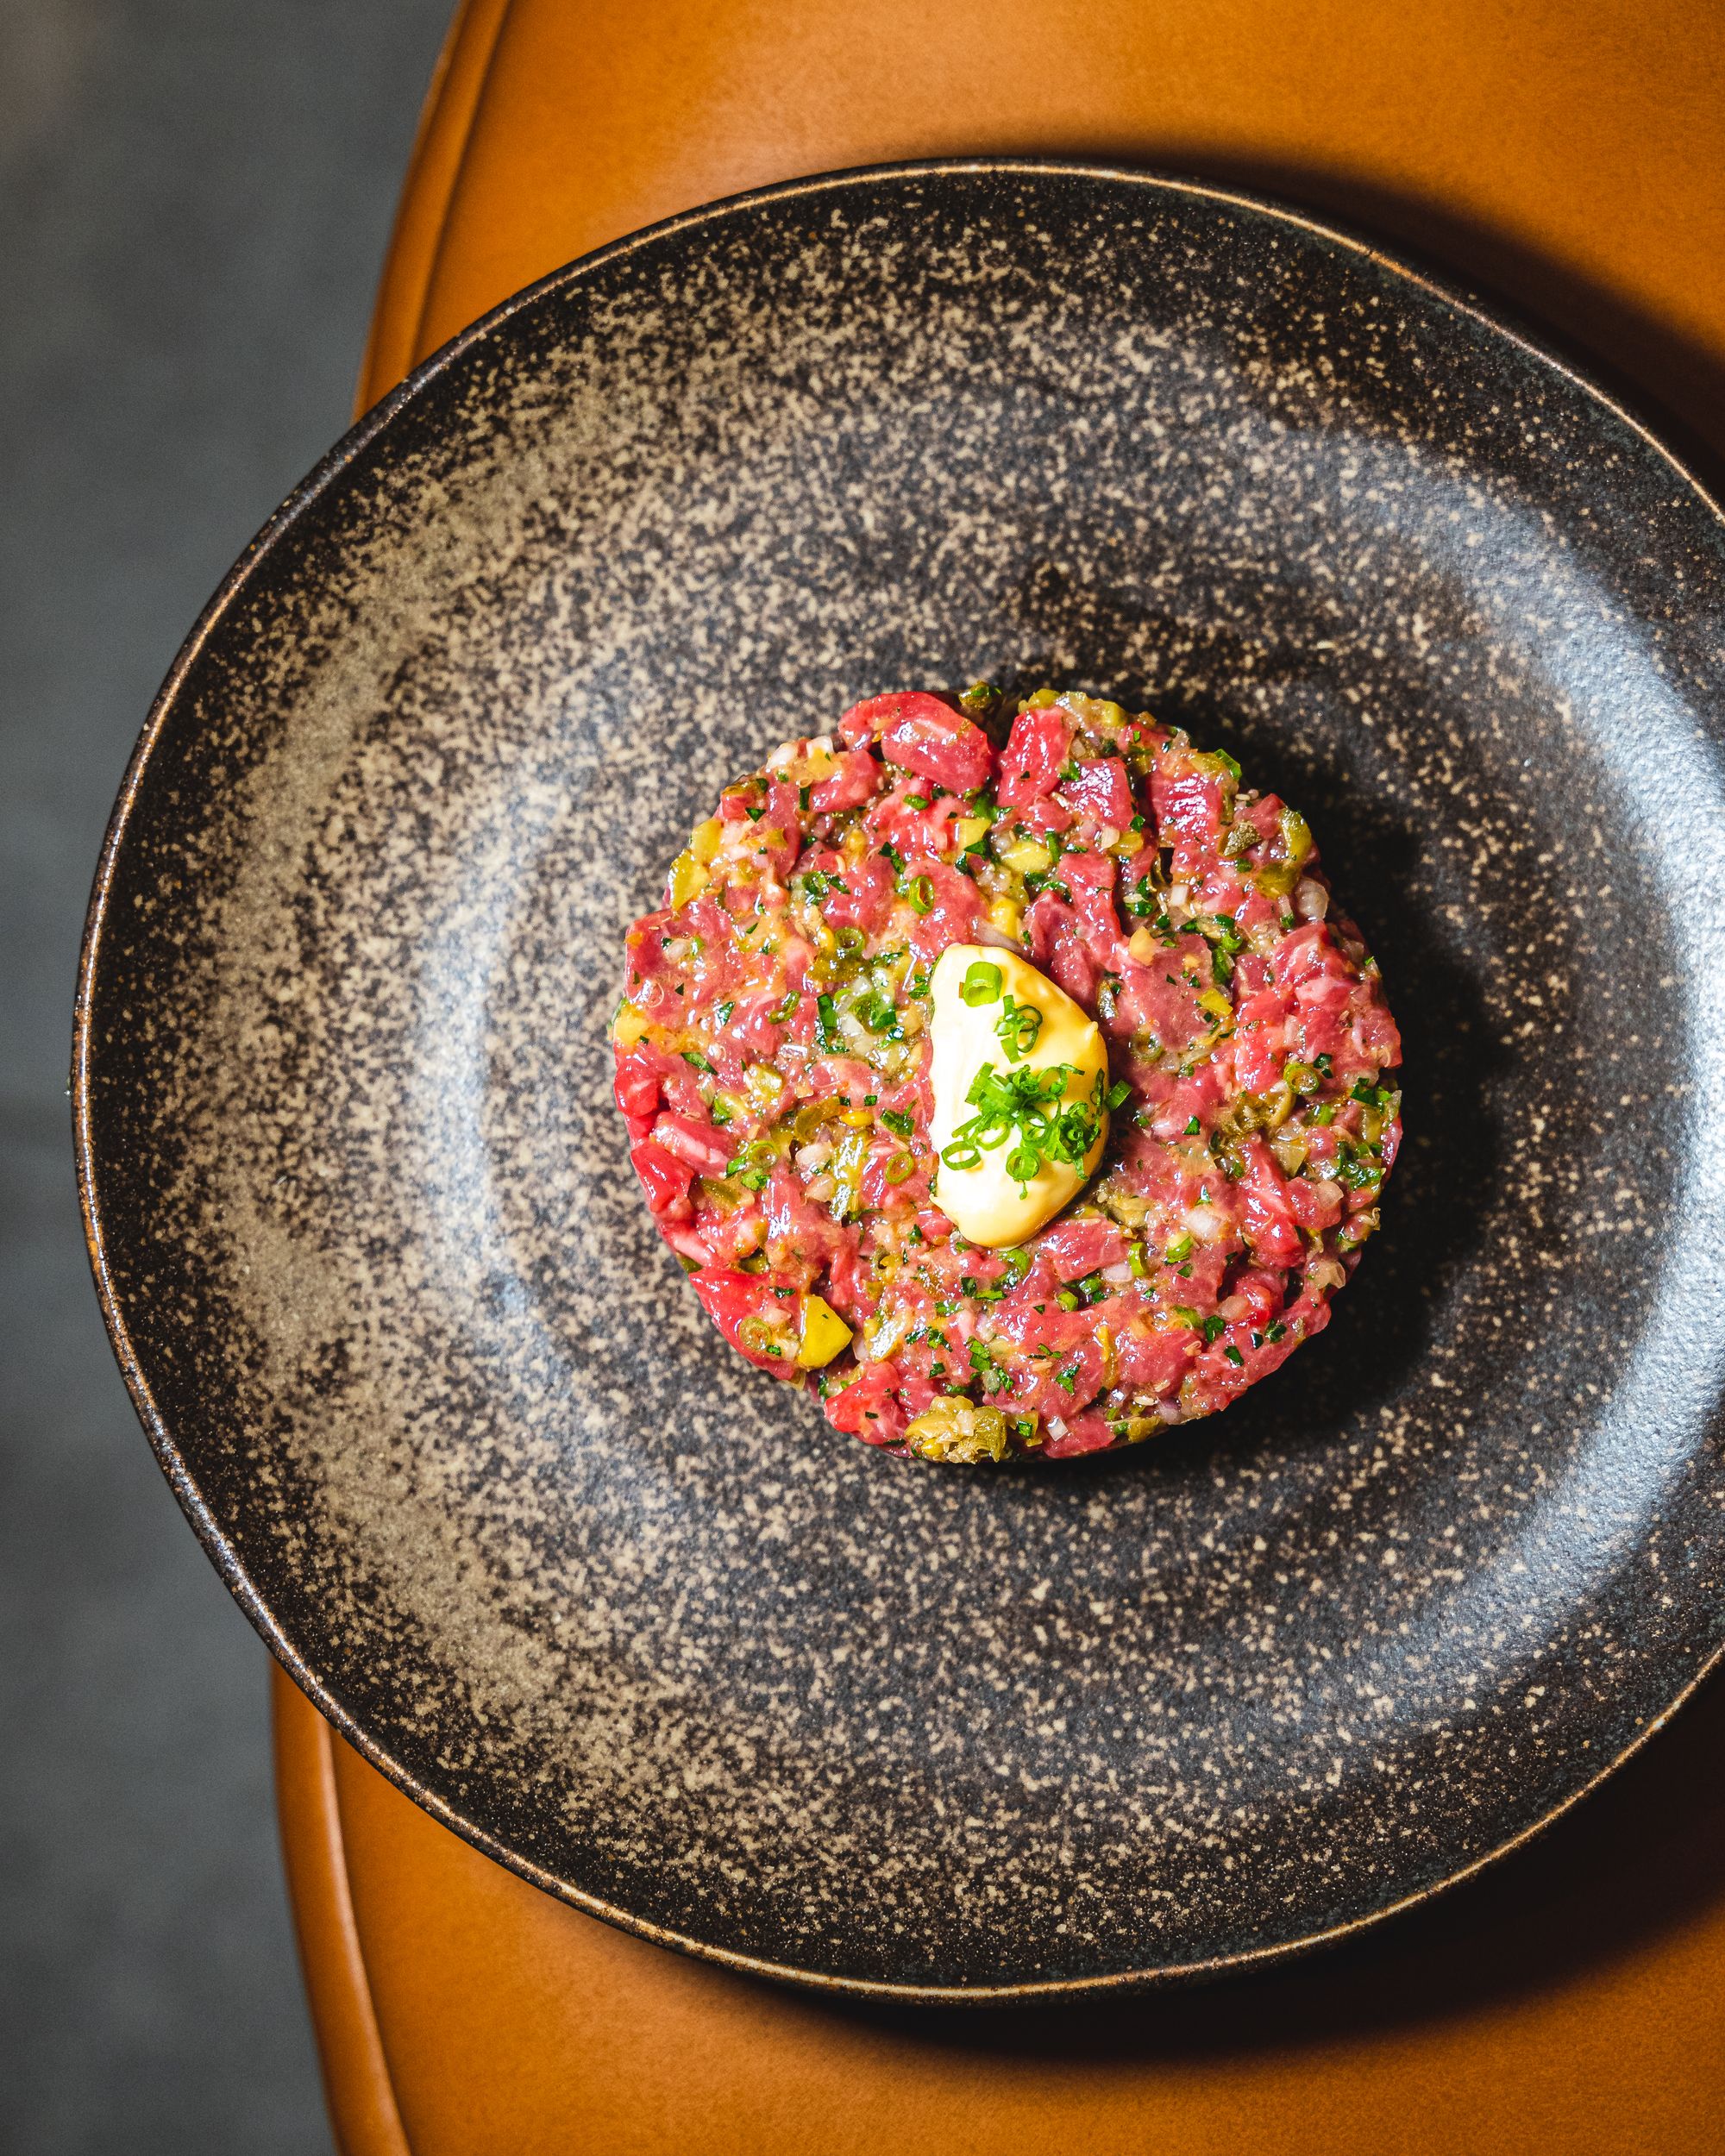 Beef tartare served on a black and bronze plate